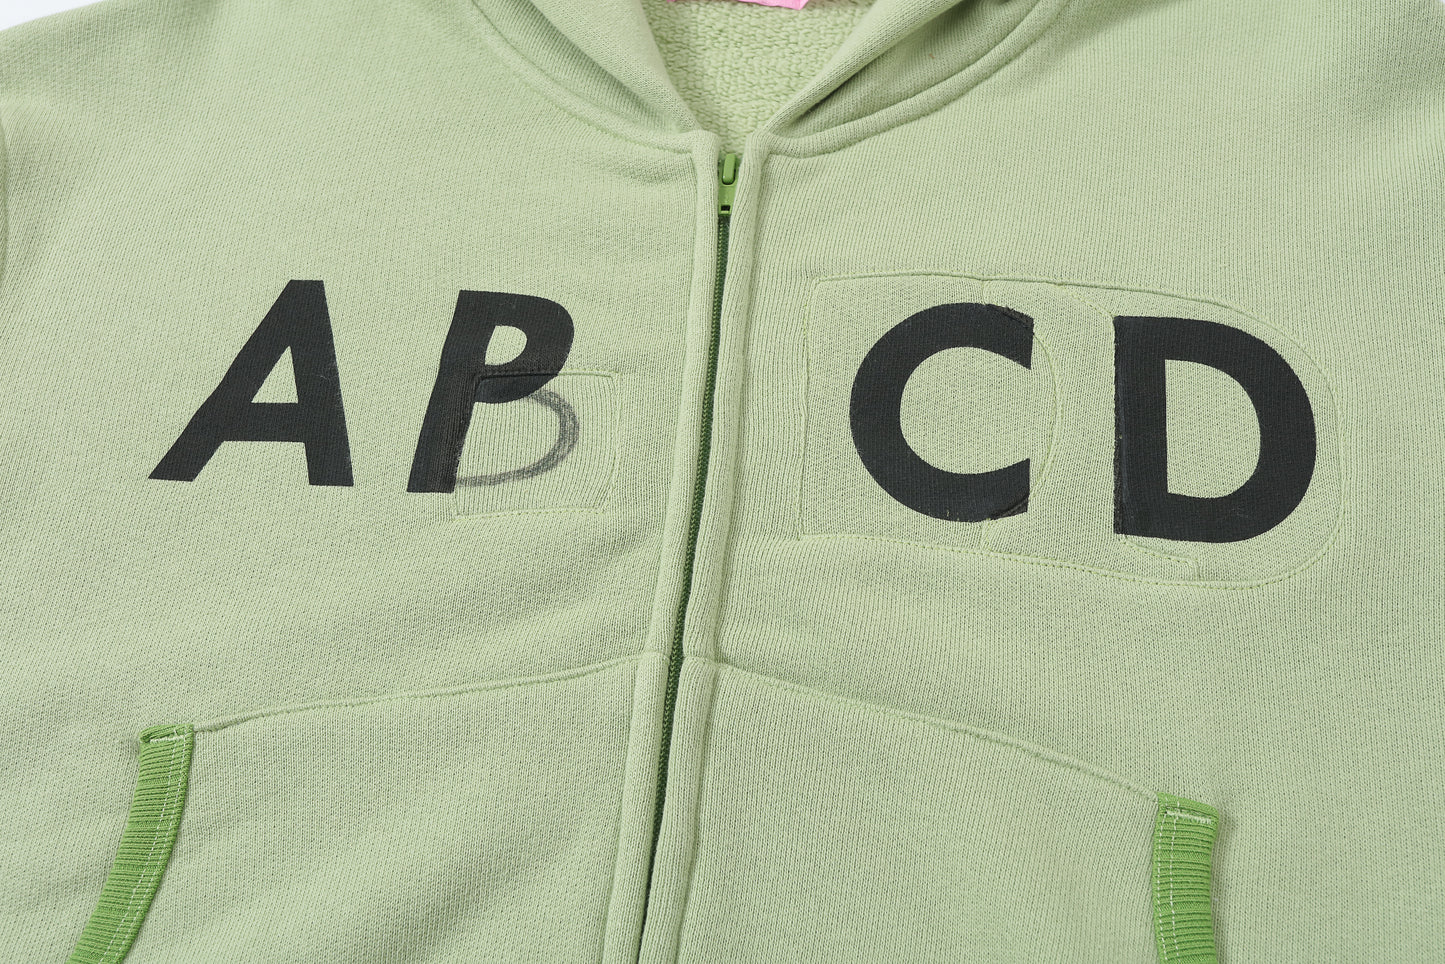 ABCD THE BEST ZIP HOODIE EVER/Green